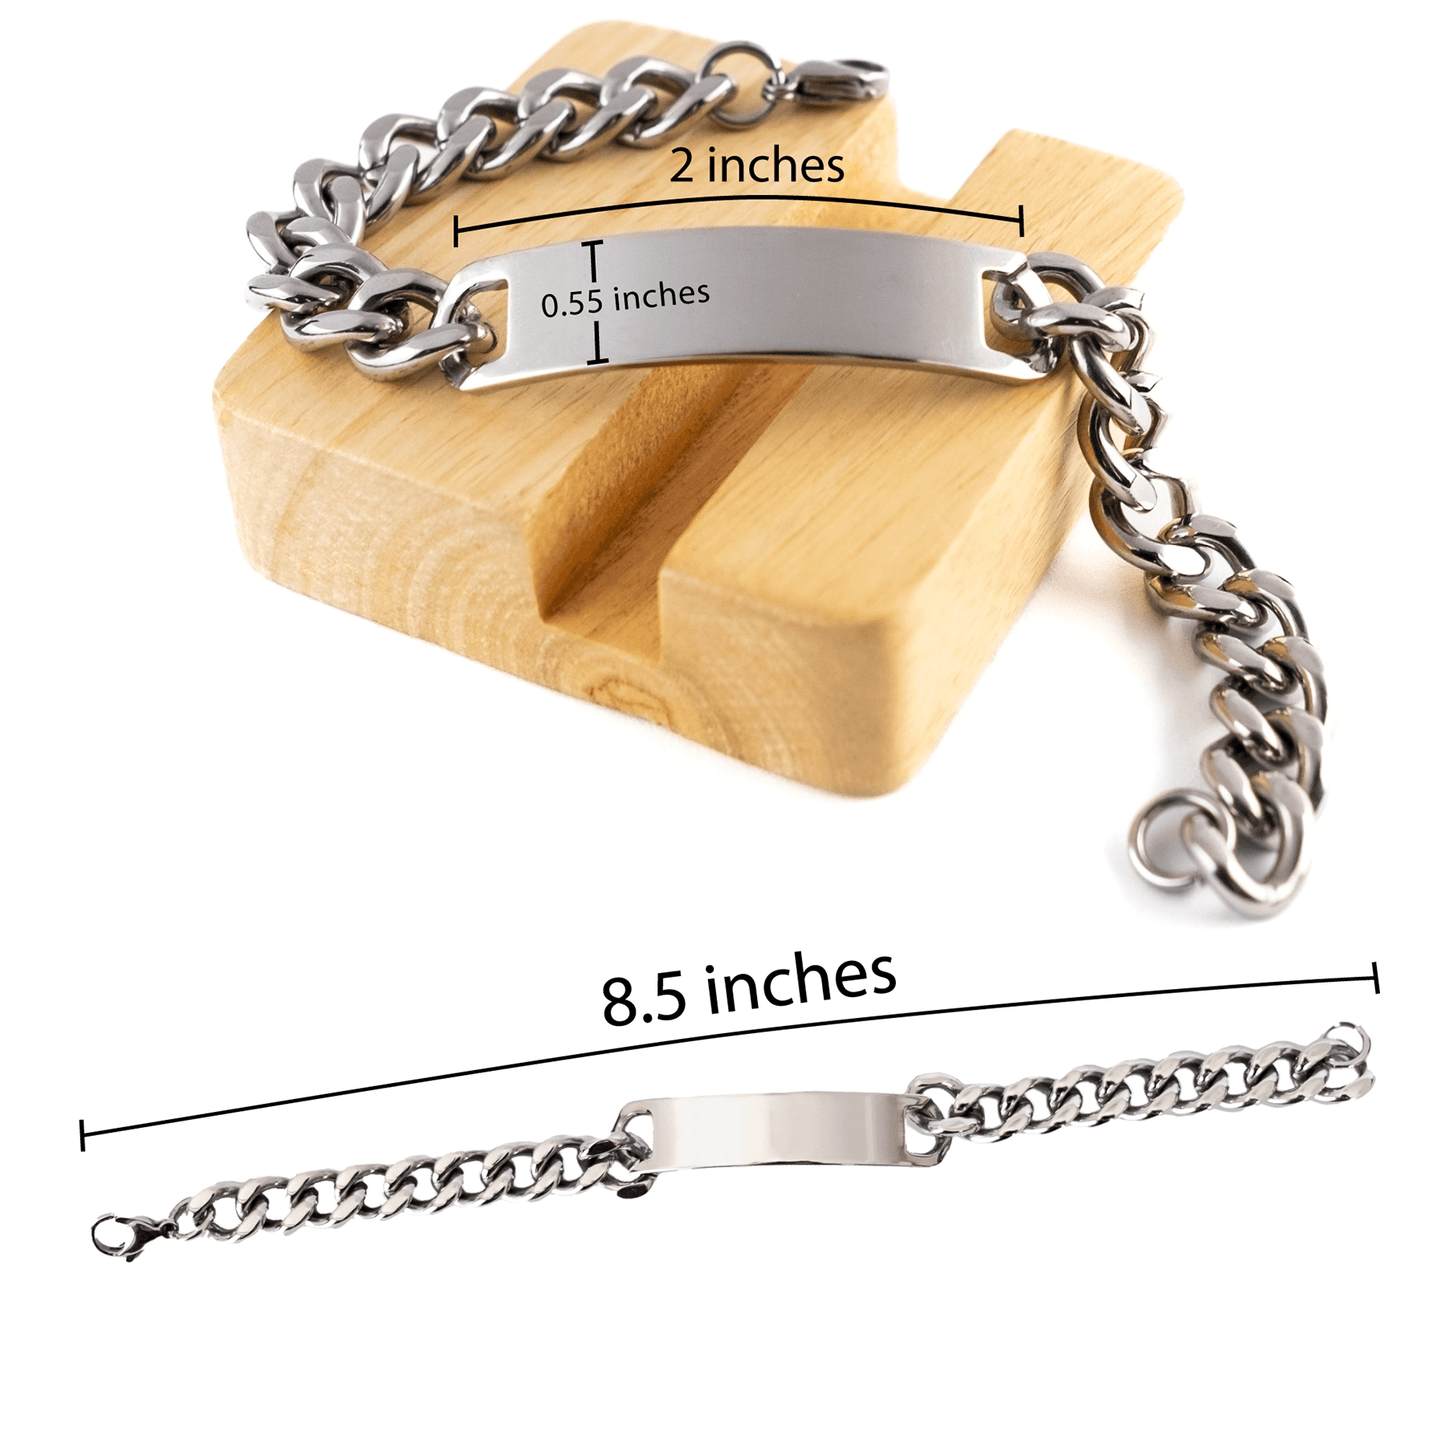 Remarkable Bookbinder Gifts, Your dedication and hard work, Inspirational Birthday Christmas Unique Cuban Chain Stainless Steel Bracelet For Bookbinder, Coworkers, Men, Women, Friends - Mallard Moon Gift Shop